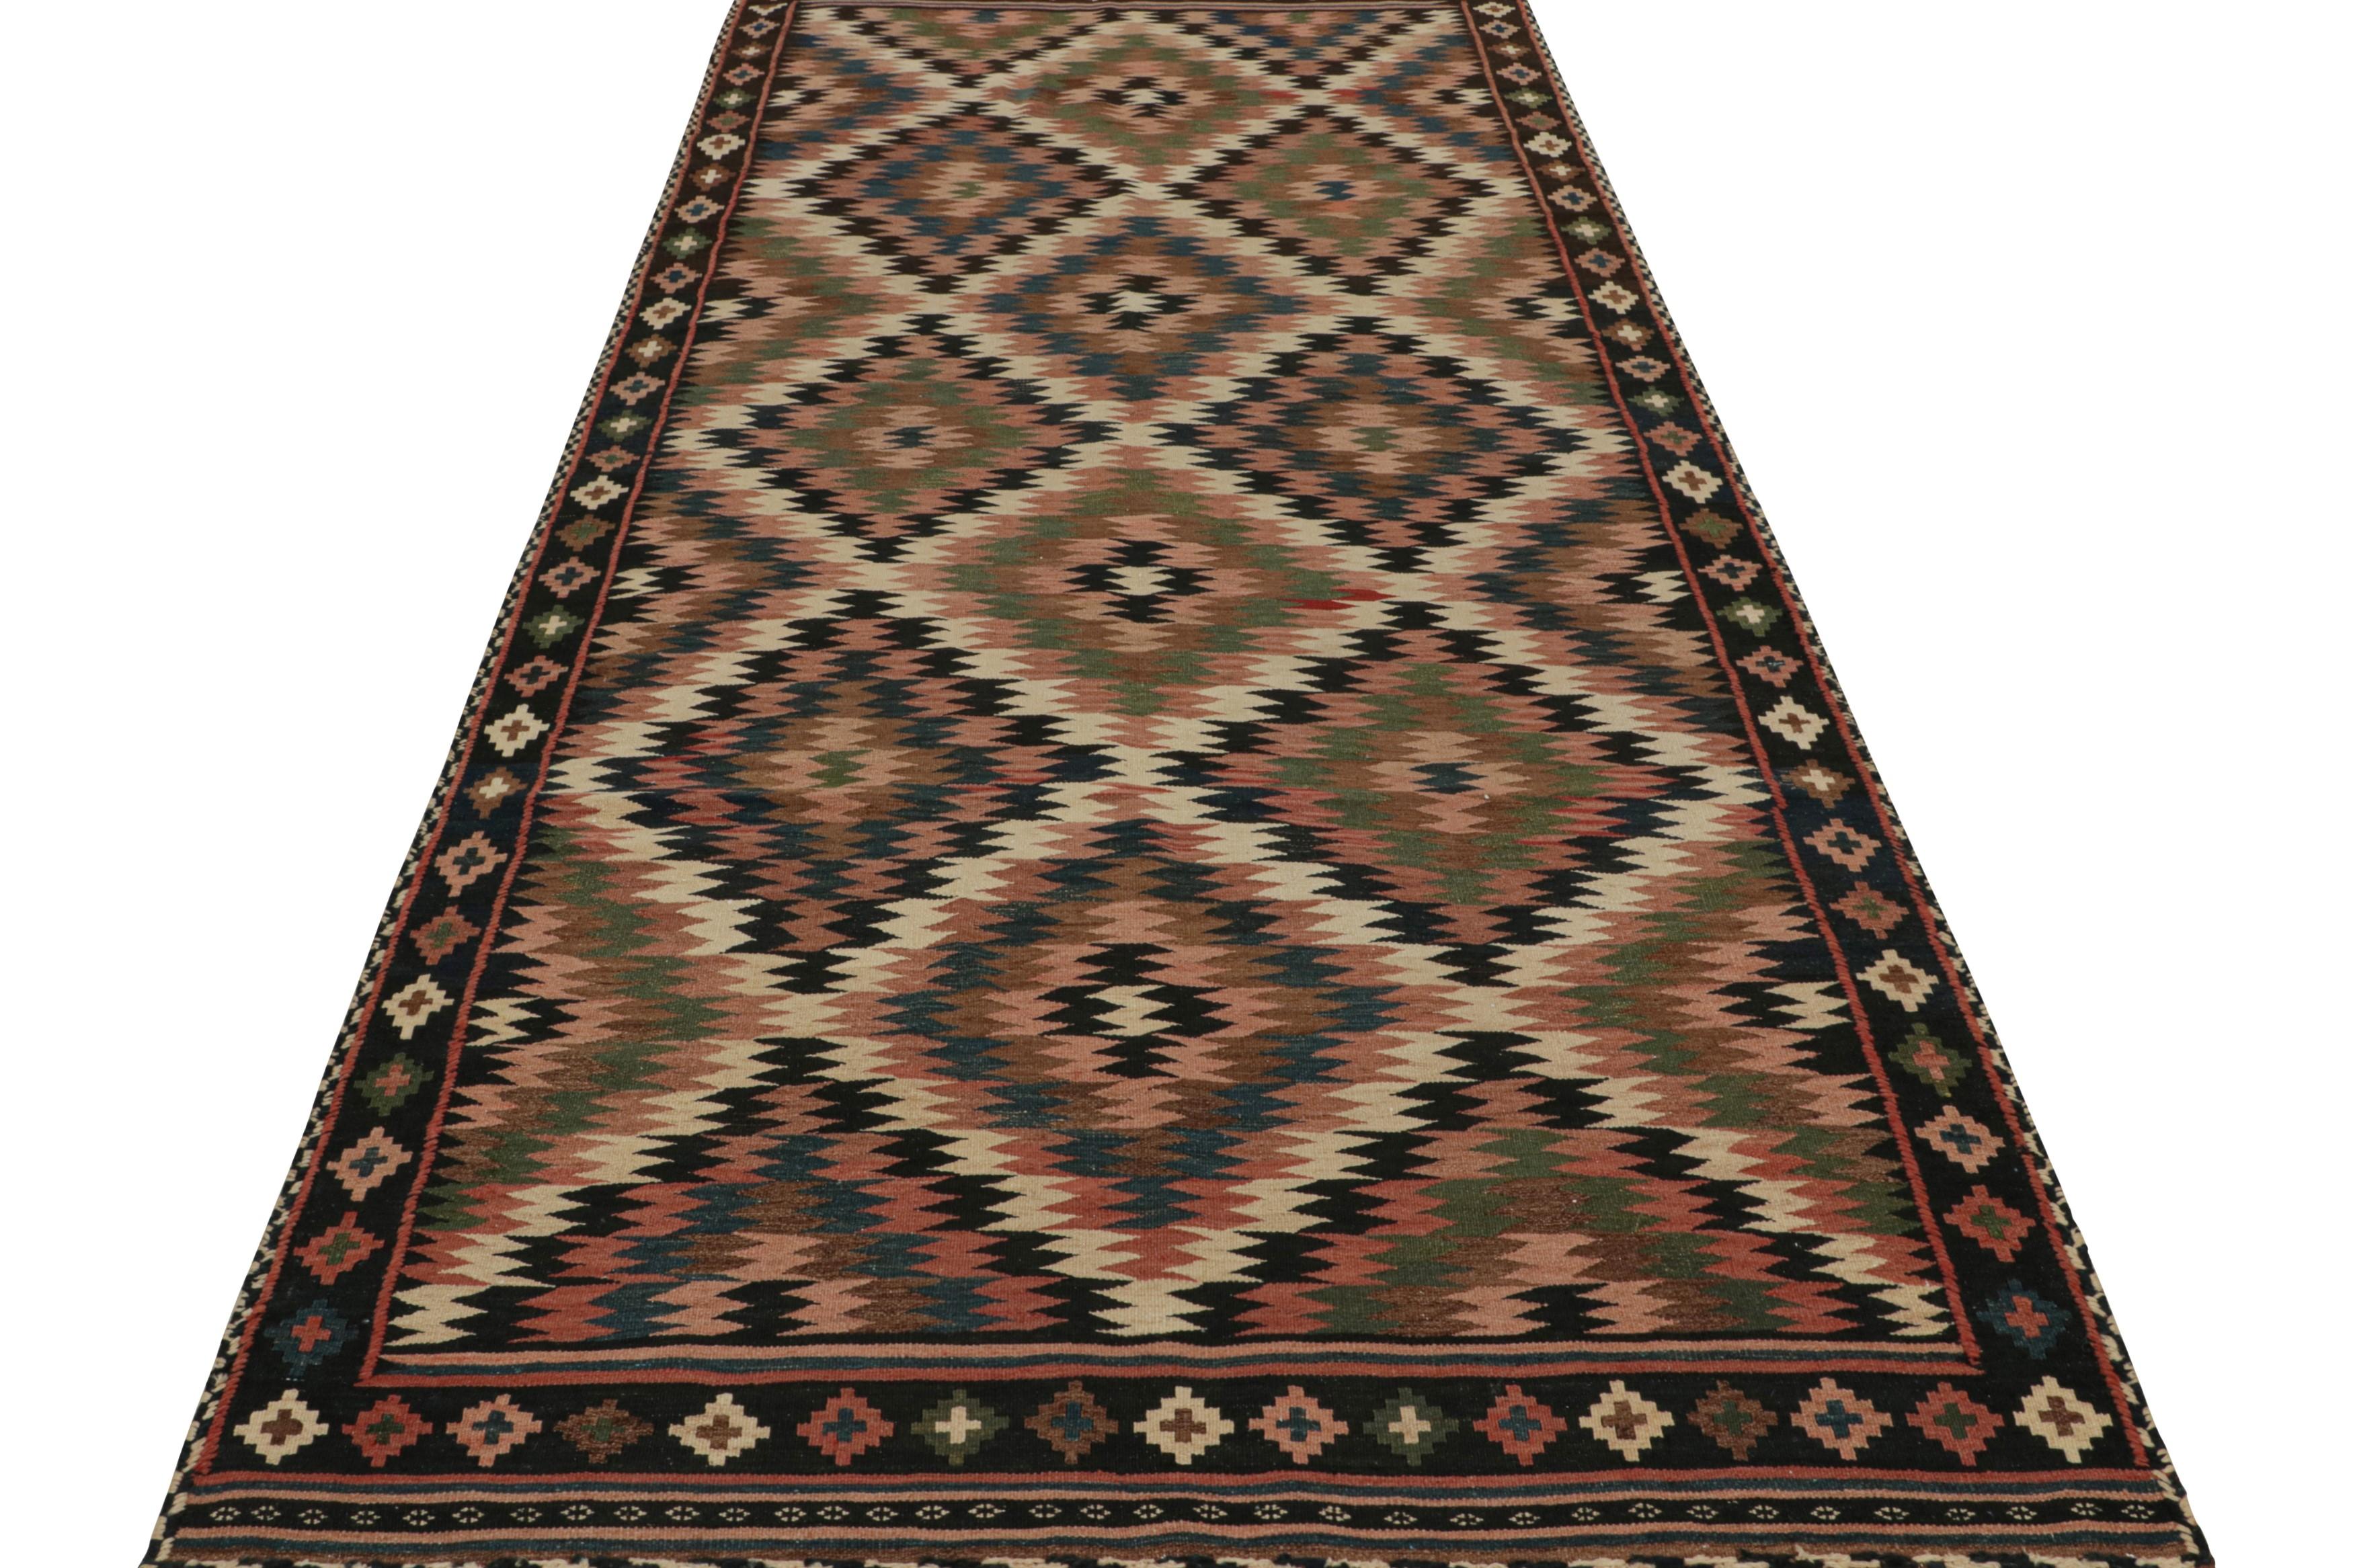 Hand-Woven Vintage Afghan Tribal Kilim with Polychromatic Patterns by Rug & Kilim For Sale